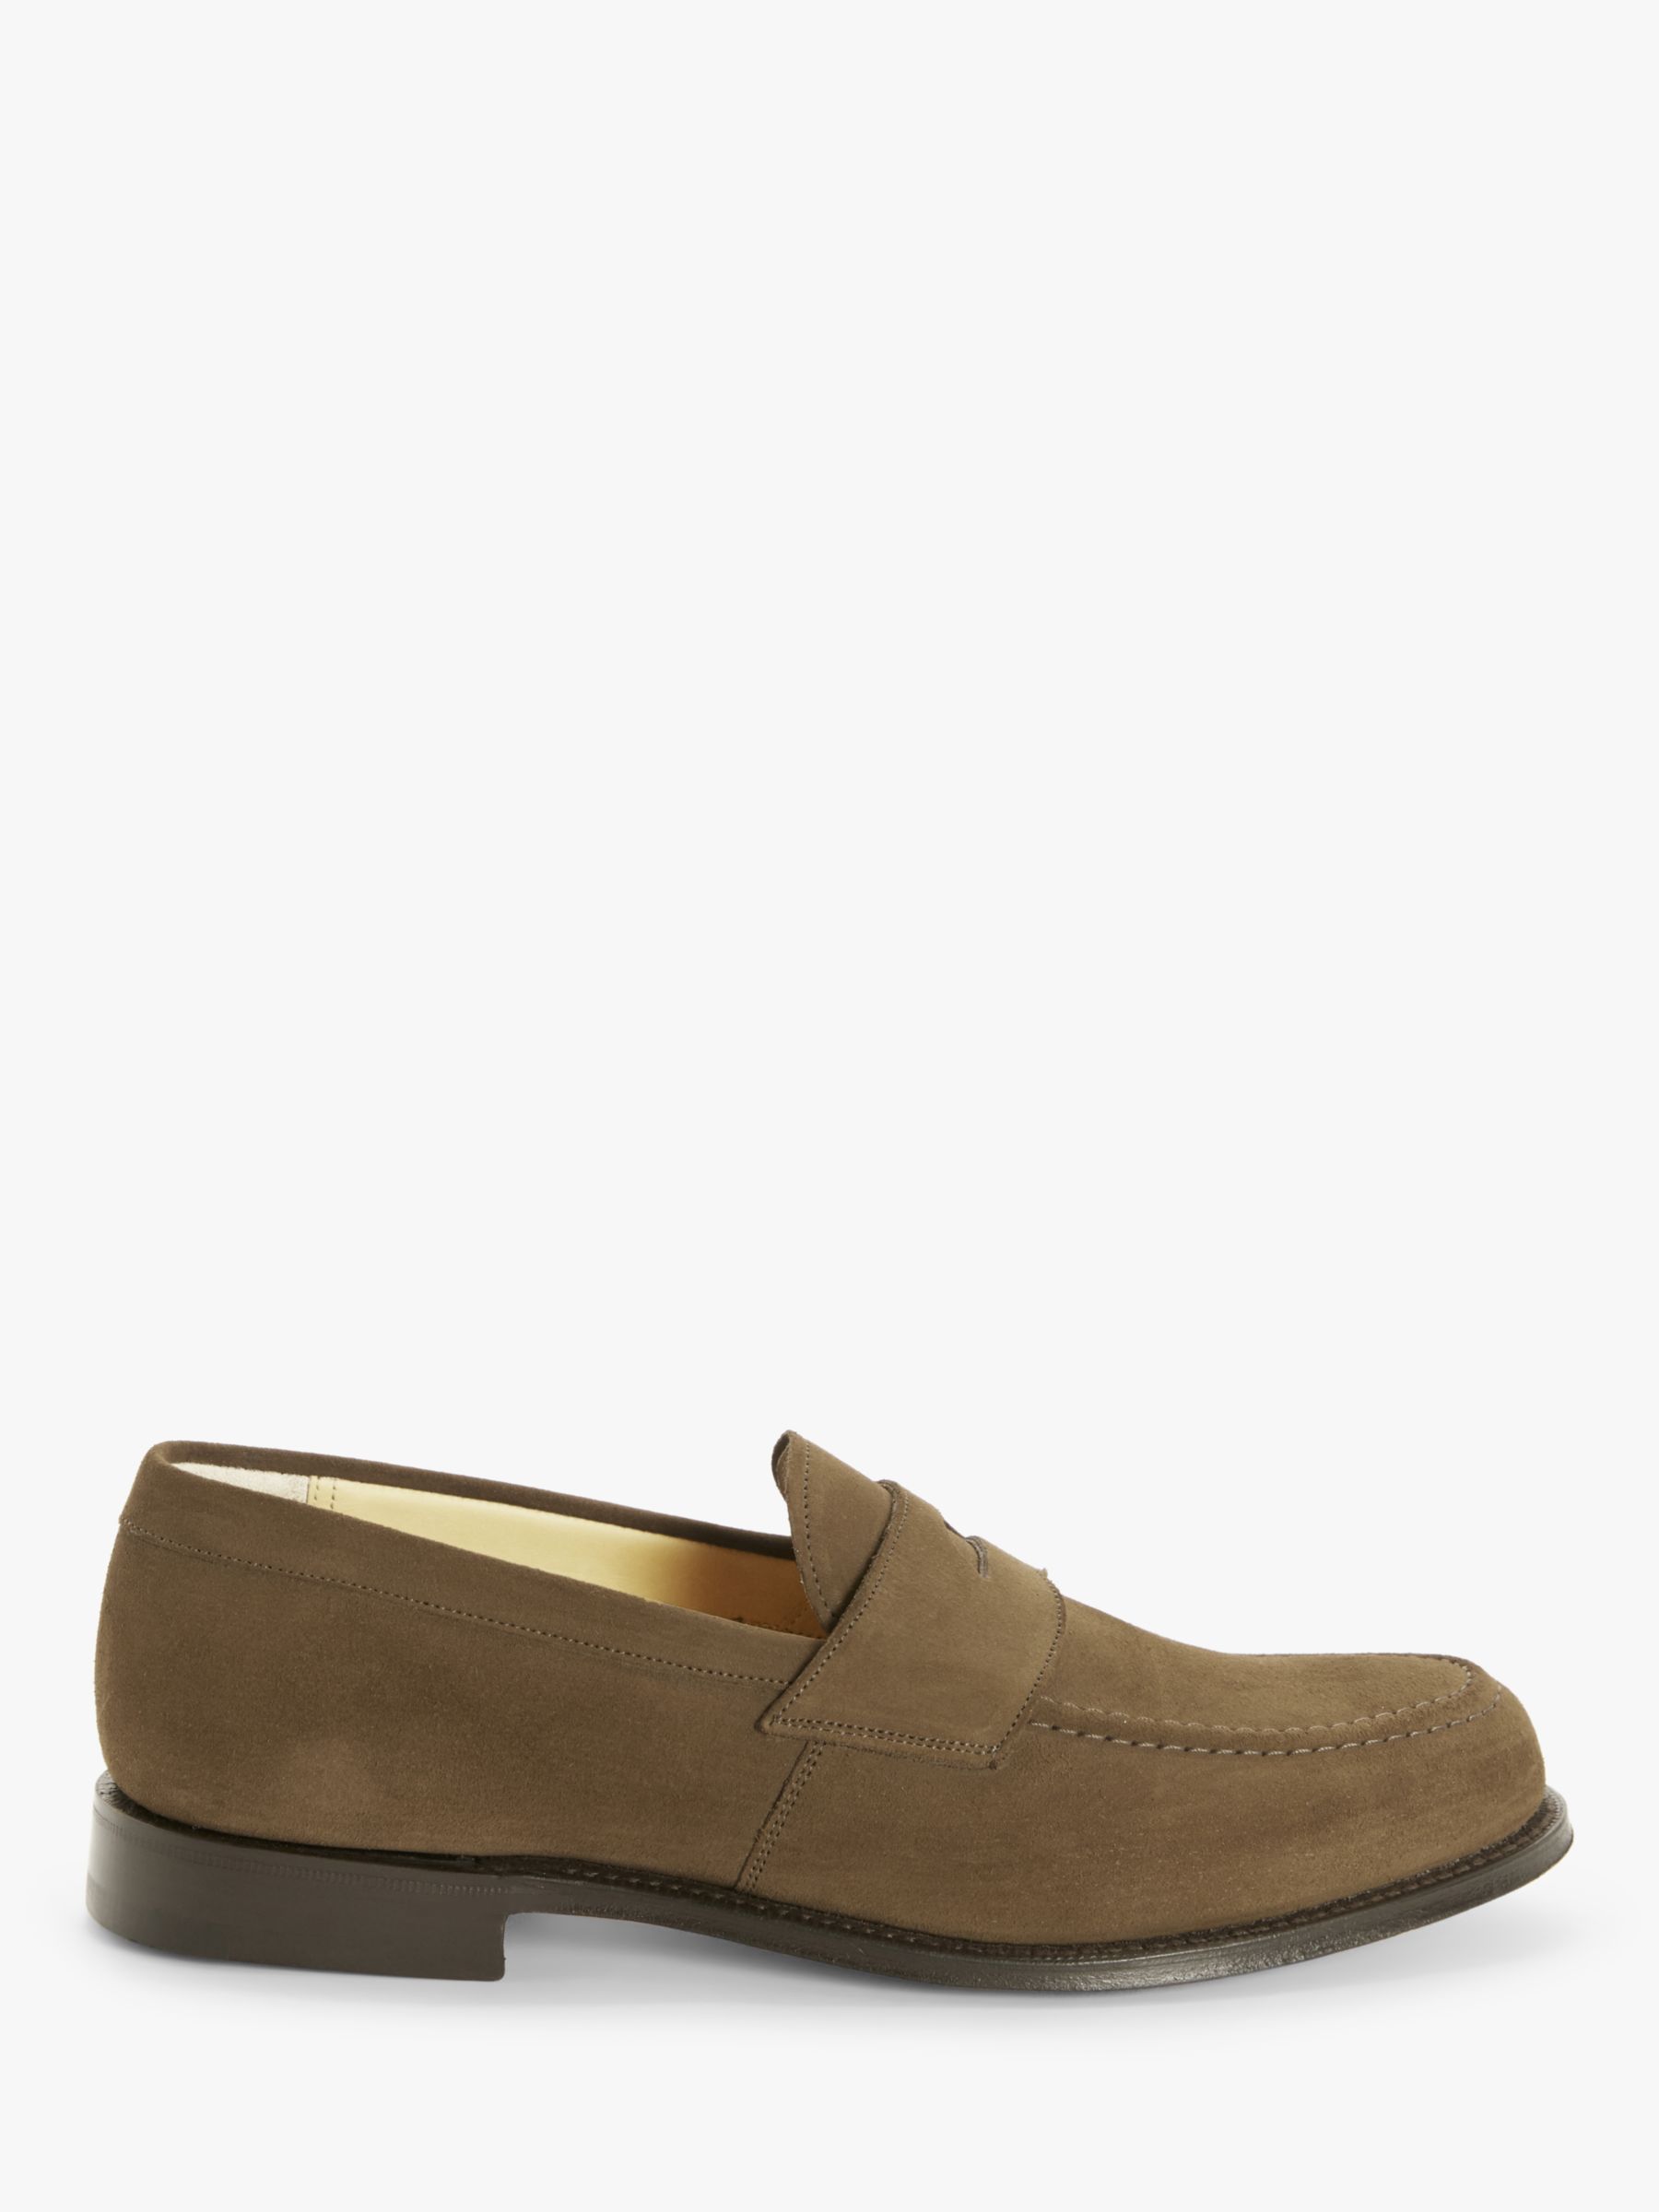 Church's Dawley Leather Loafers, Tobacco